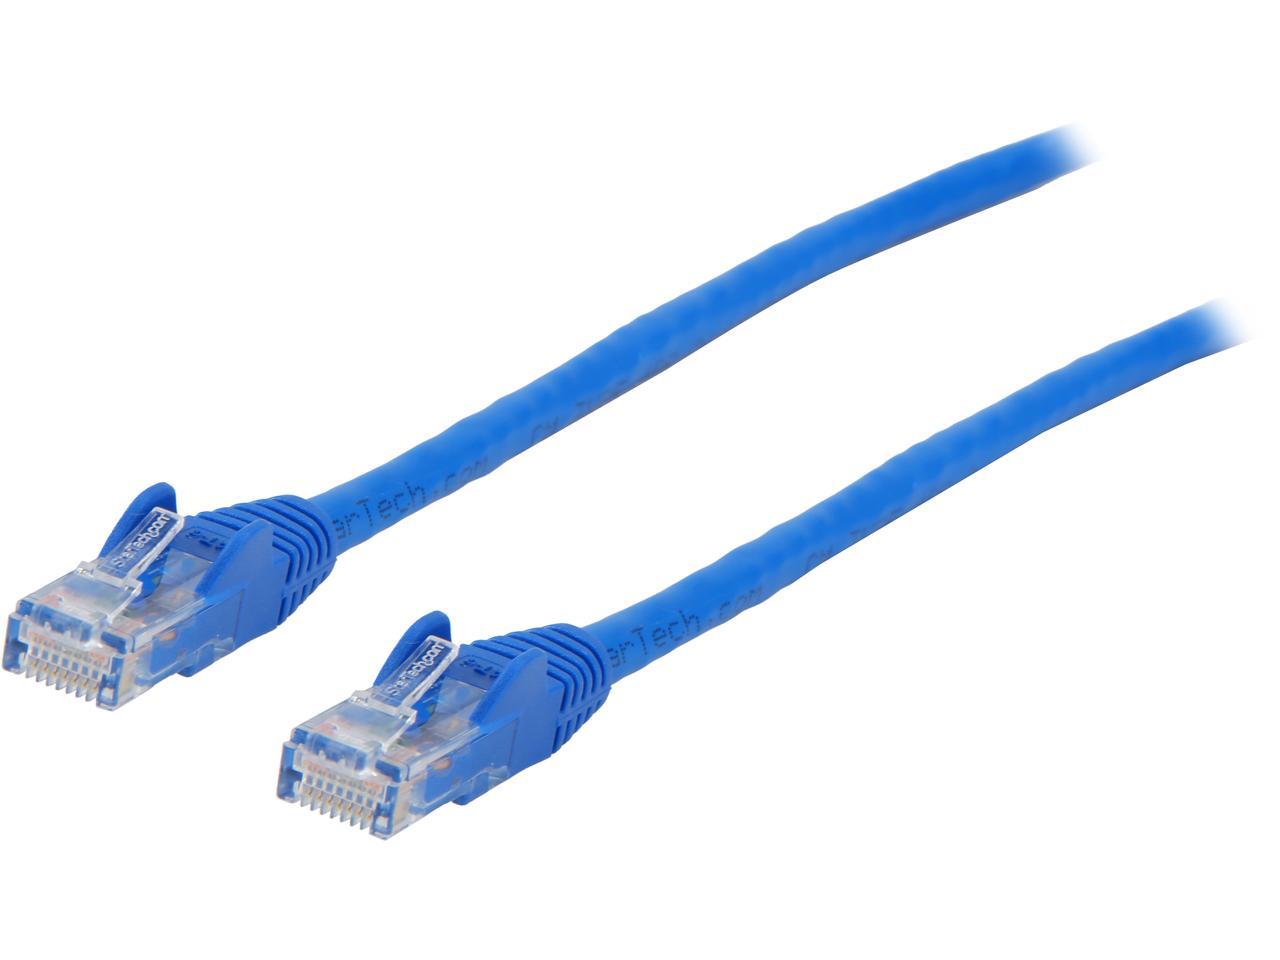 StarTech N6PATCH8BL StarTech.com Cat6 Patch Cable - 8 ft. - Blue Ethernet Cable - Snagless RJ45 Cable - Ethernet Cord - Cat 6 Cable - 8 ft.